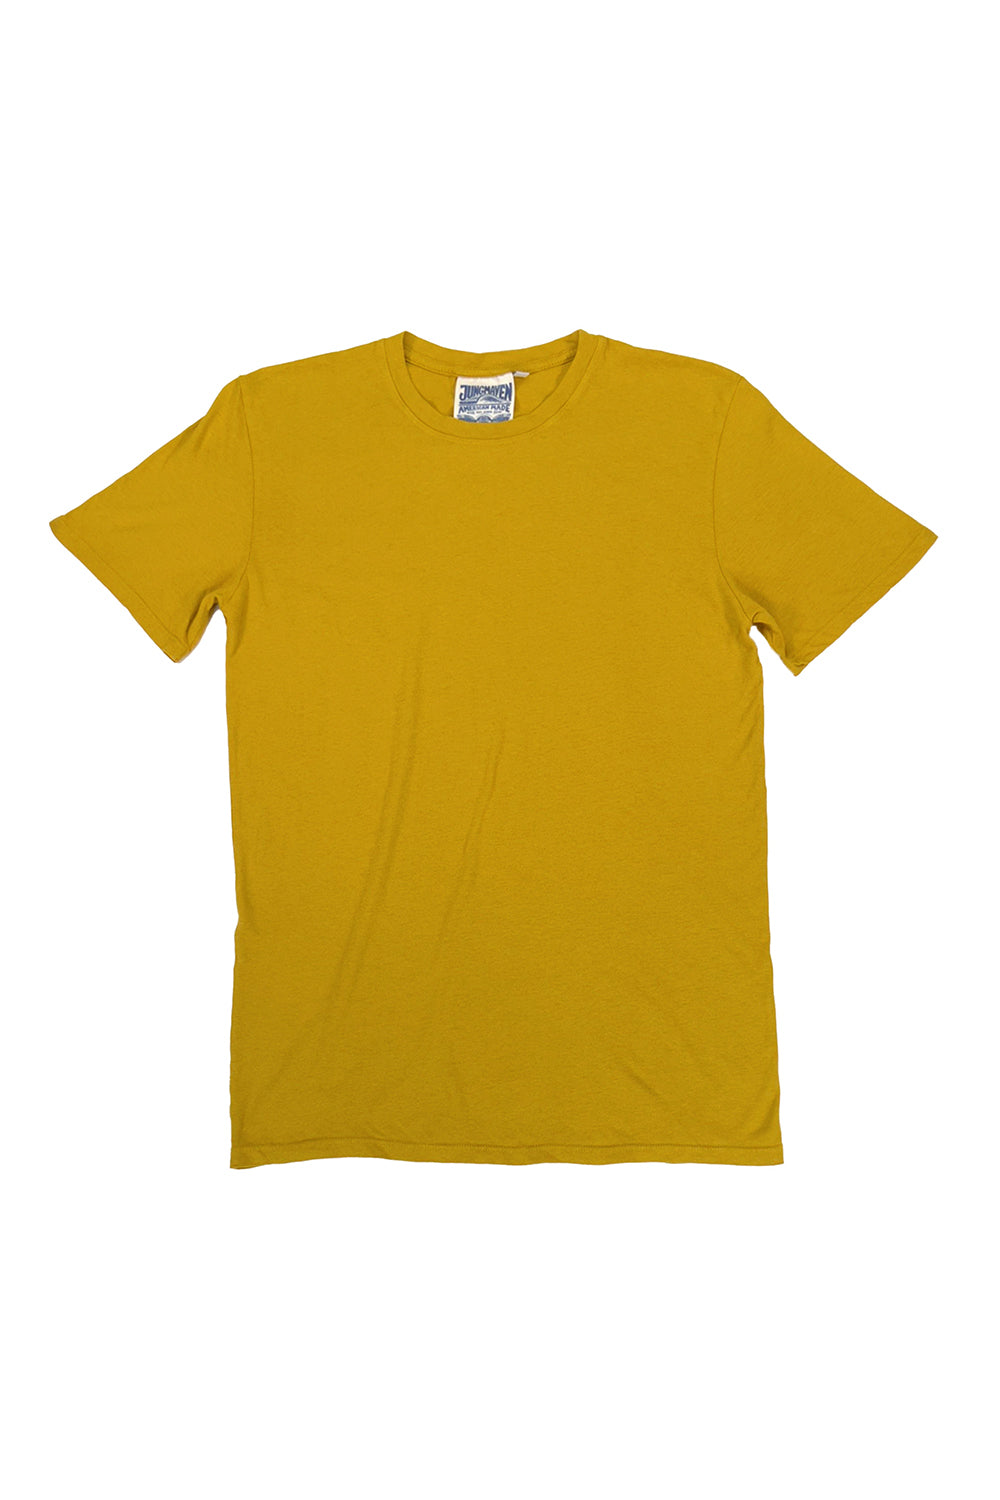 Basic Tee - Sale Colors | Jungmaven Hemp Clothing & Accessories / Color: Spicy Mustard